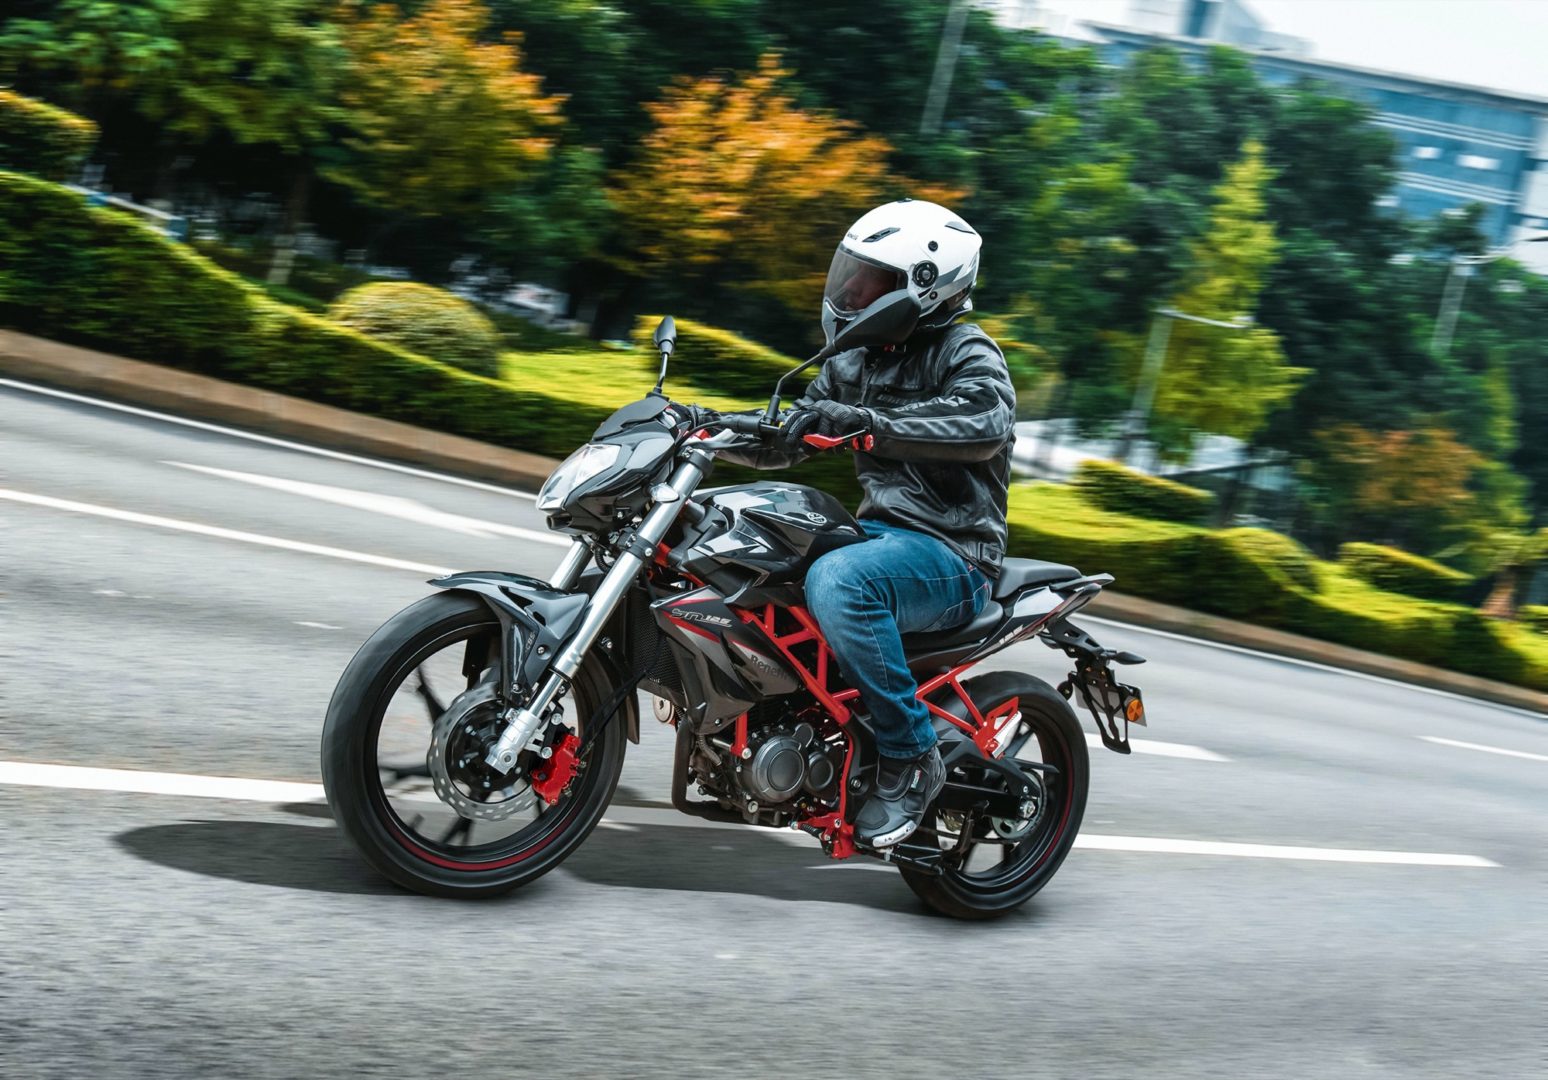 Review of Benelli Tornado Tre 900 RS 2004: pictures, live 